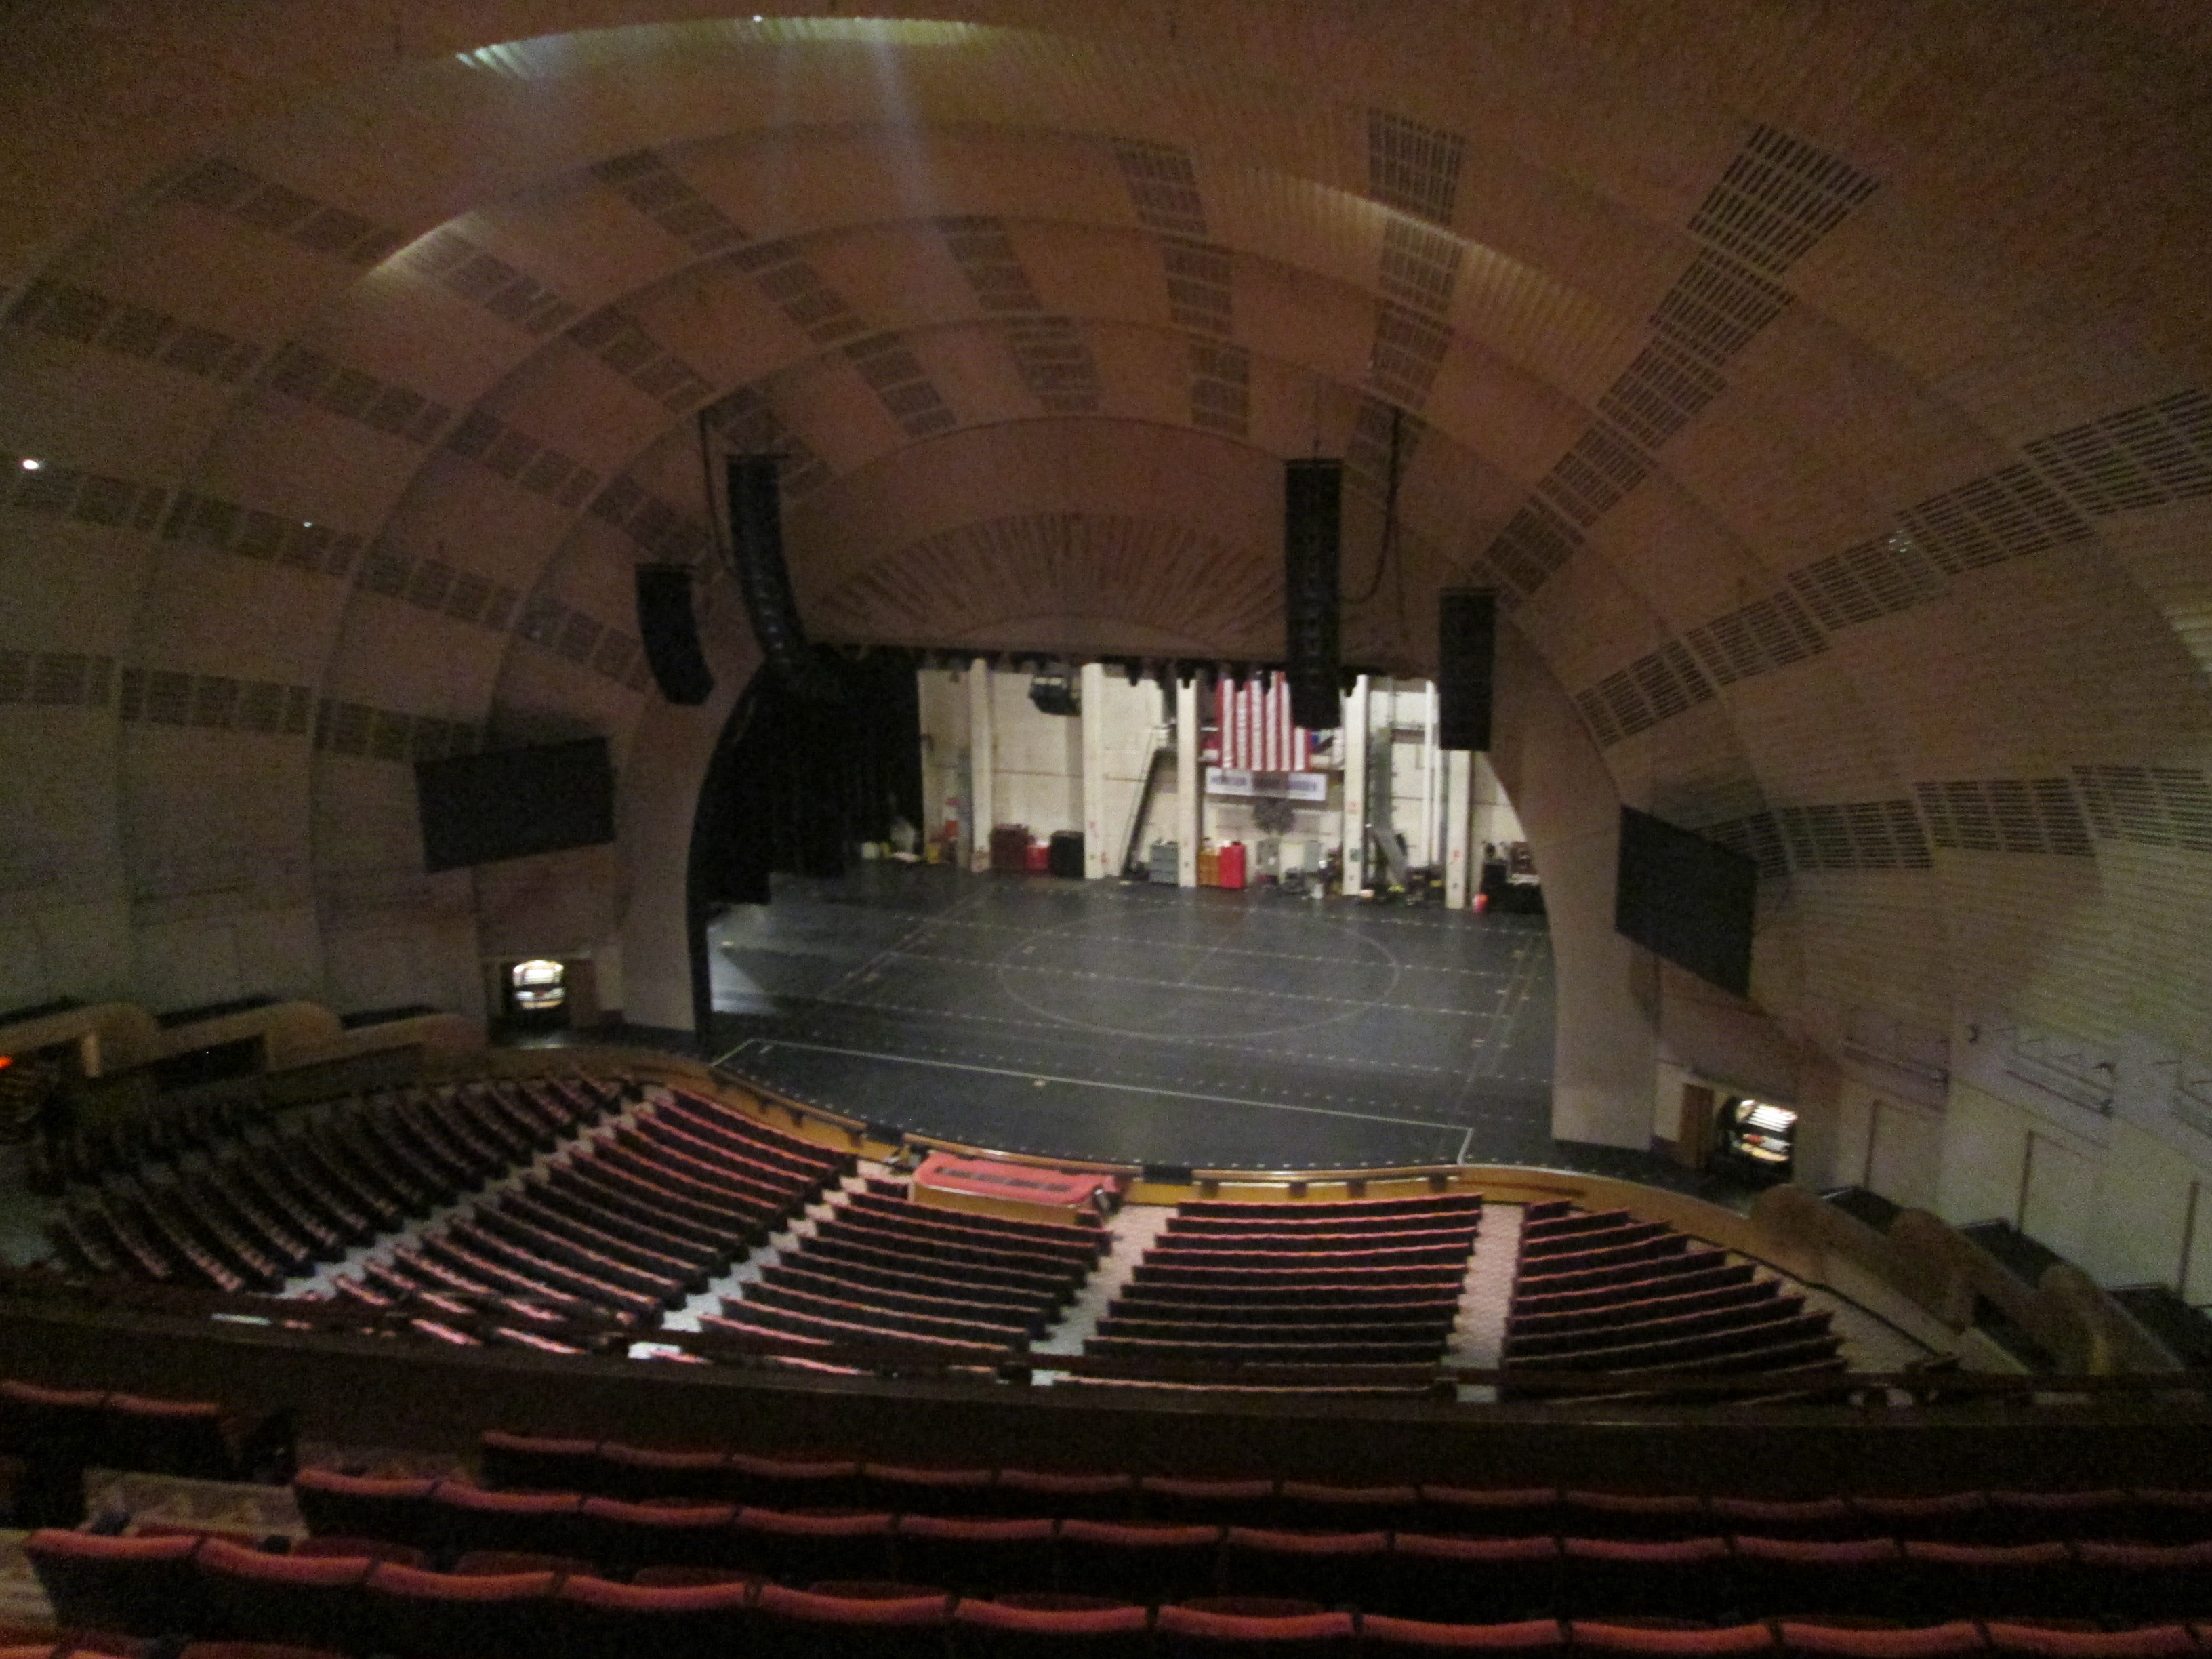 Review: Radio City Music Hall Tour - what you'll see behind the scenes of  the famous Radio City Music Hall